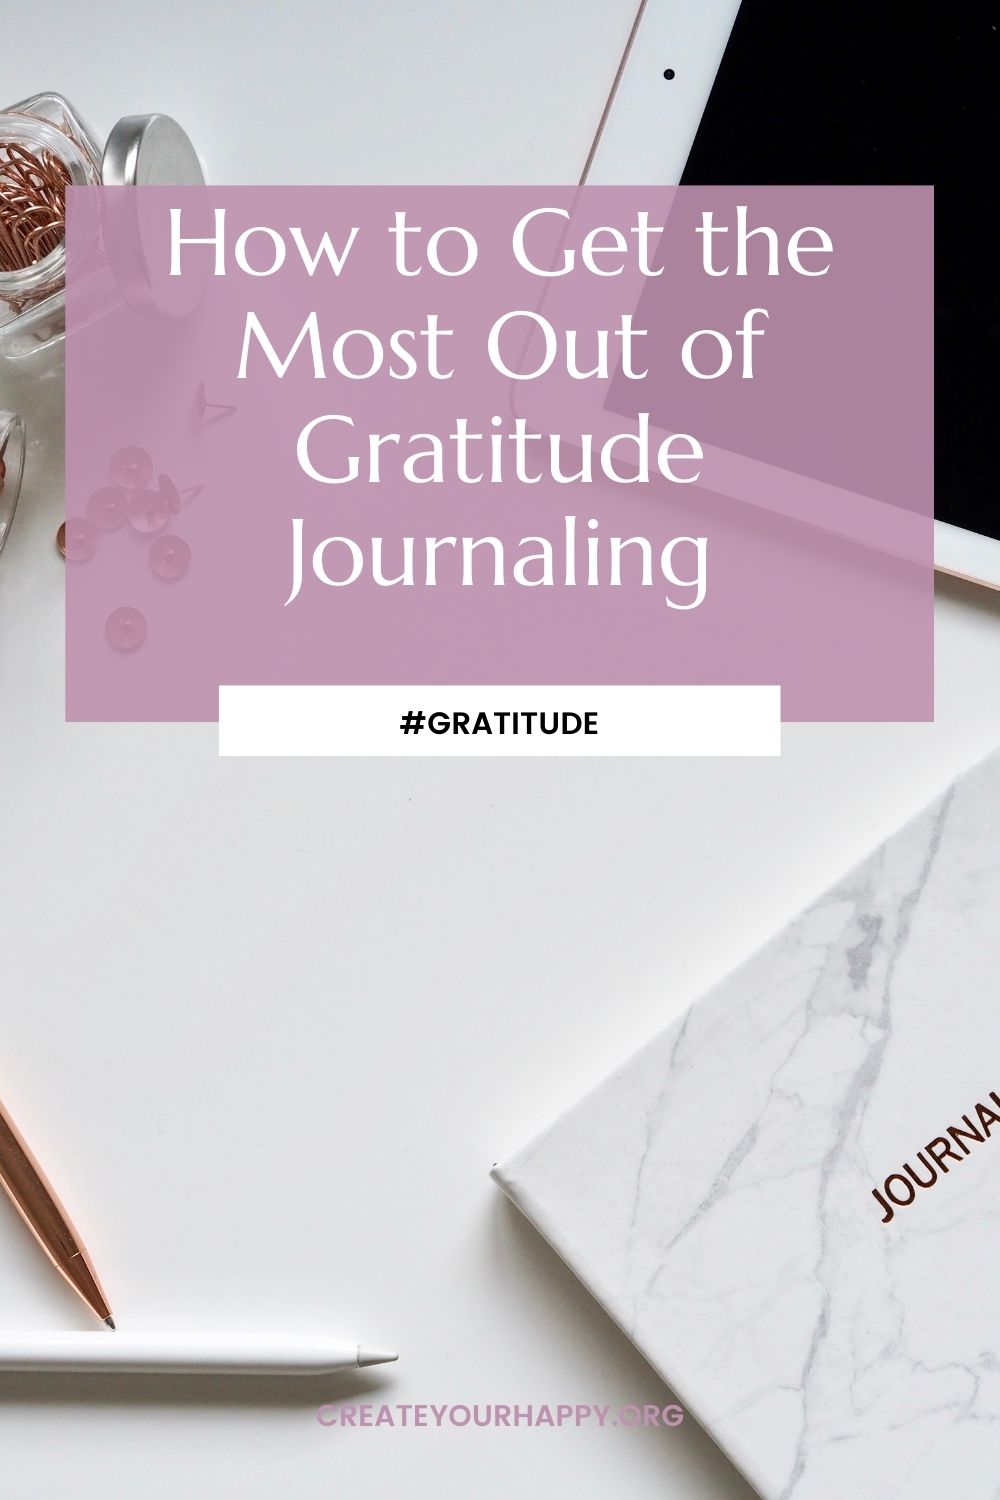 How To Get The Most out of Gratitude Journaling